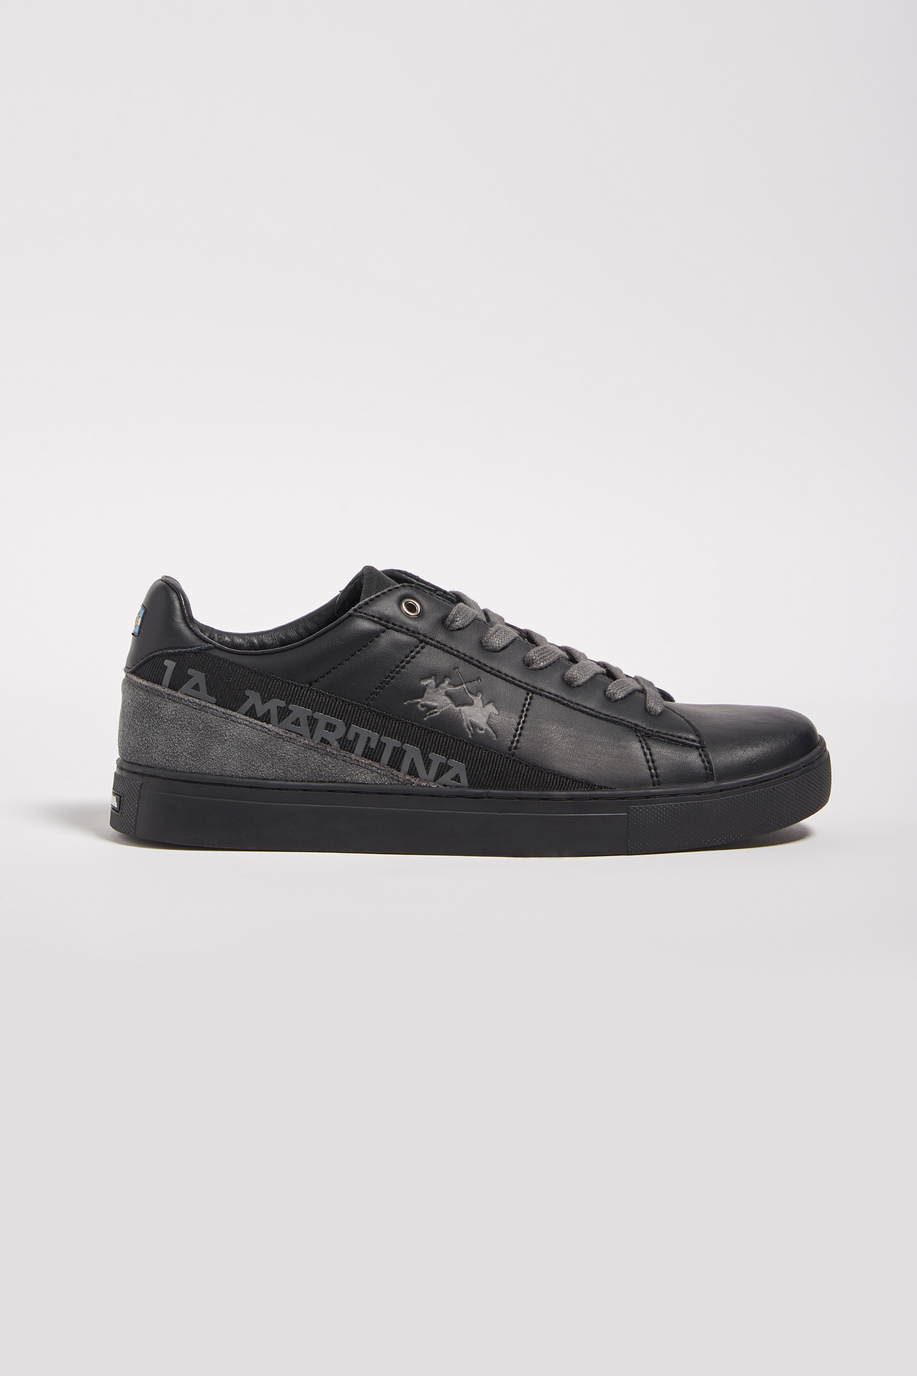 Two-tone leather sneakers - Varsity Match | La Martina - Official Online Shop